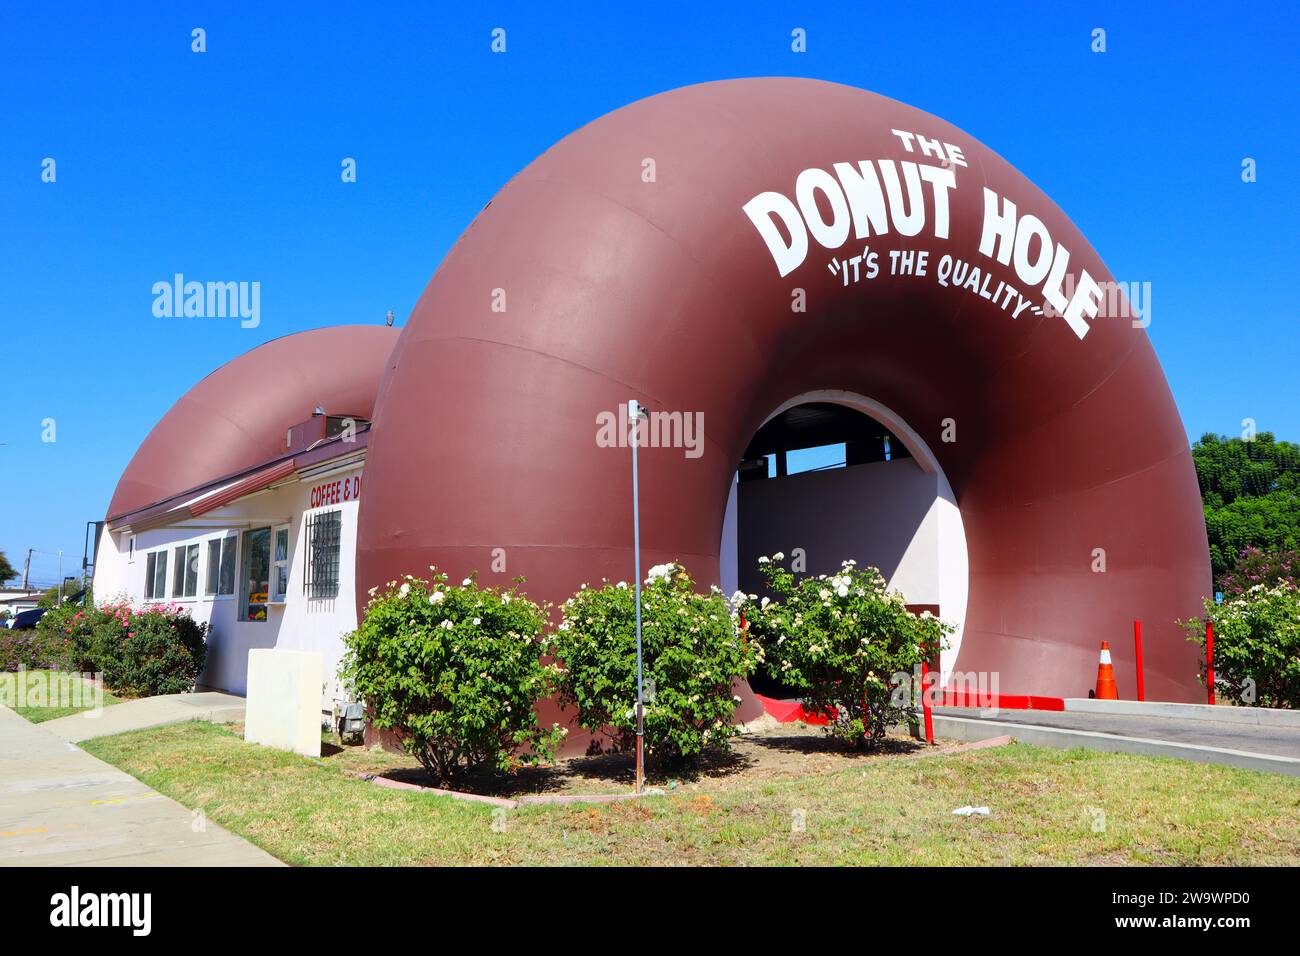 La Puente (Los Angeles), California: THE DONUT HOLE,  Two giant Donuts through which customers drive to place their orders. Located at 15300 Amar Rd, Stock Photo